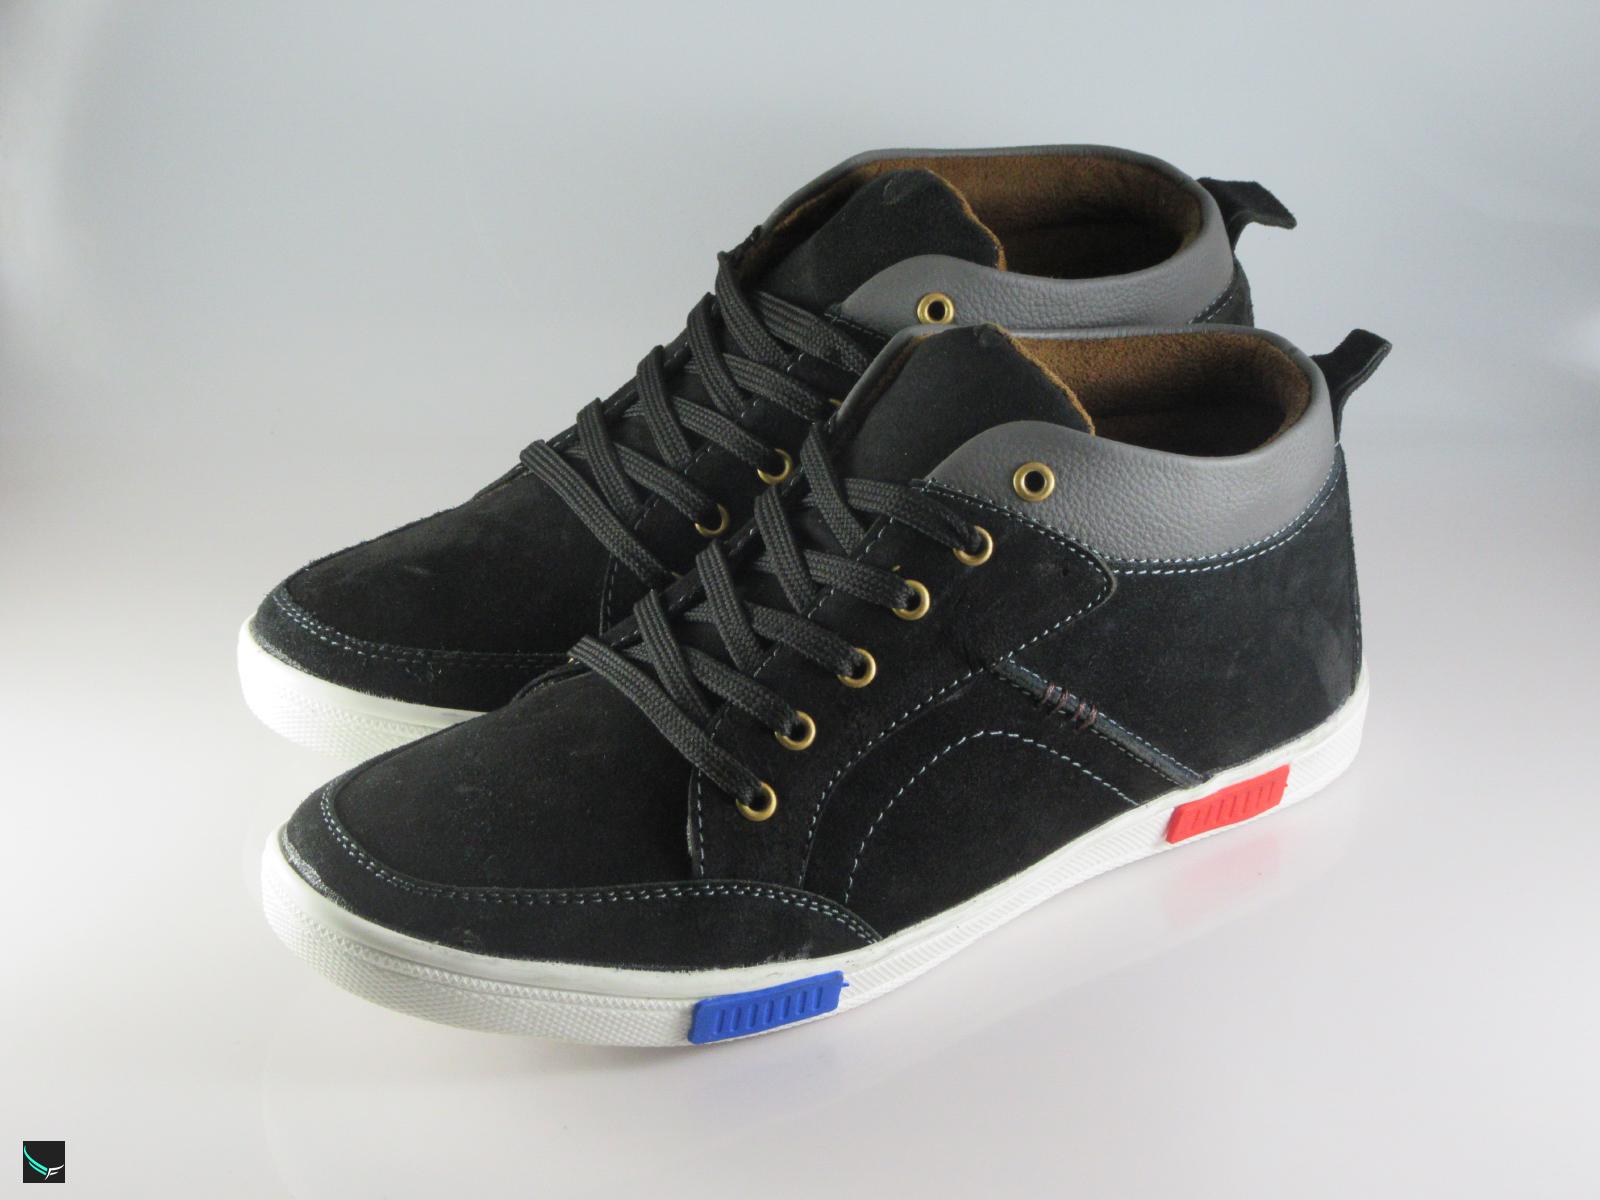 mens black casual shoes with white soles